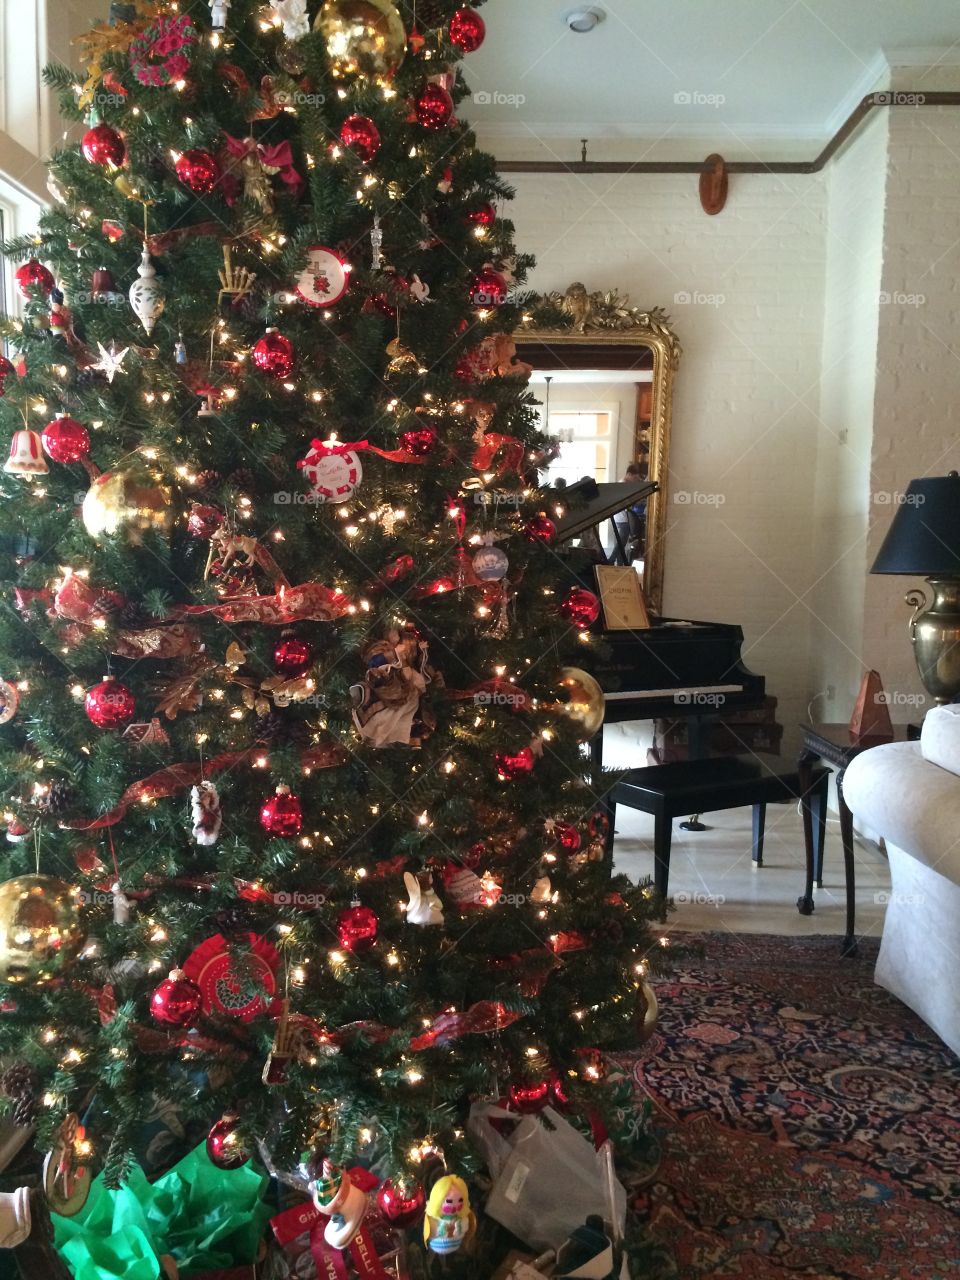 Christmas Day, cozy home, colorful Christmas tree covered in lights, and a grand piano waiting to play Christmas carols